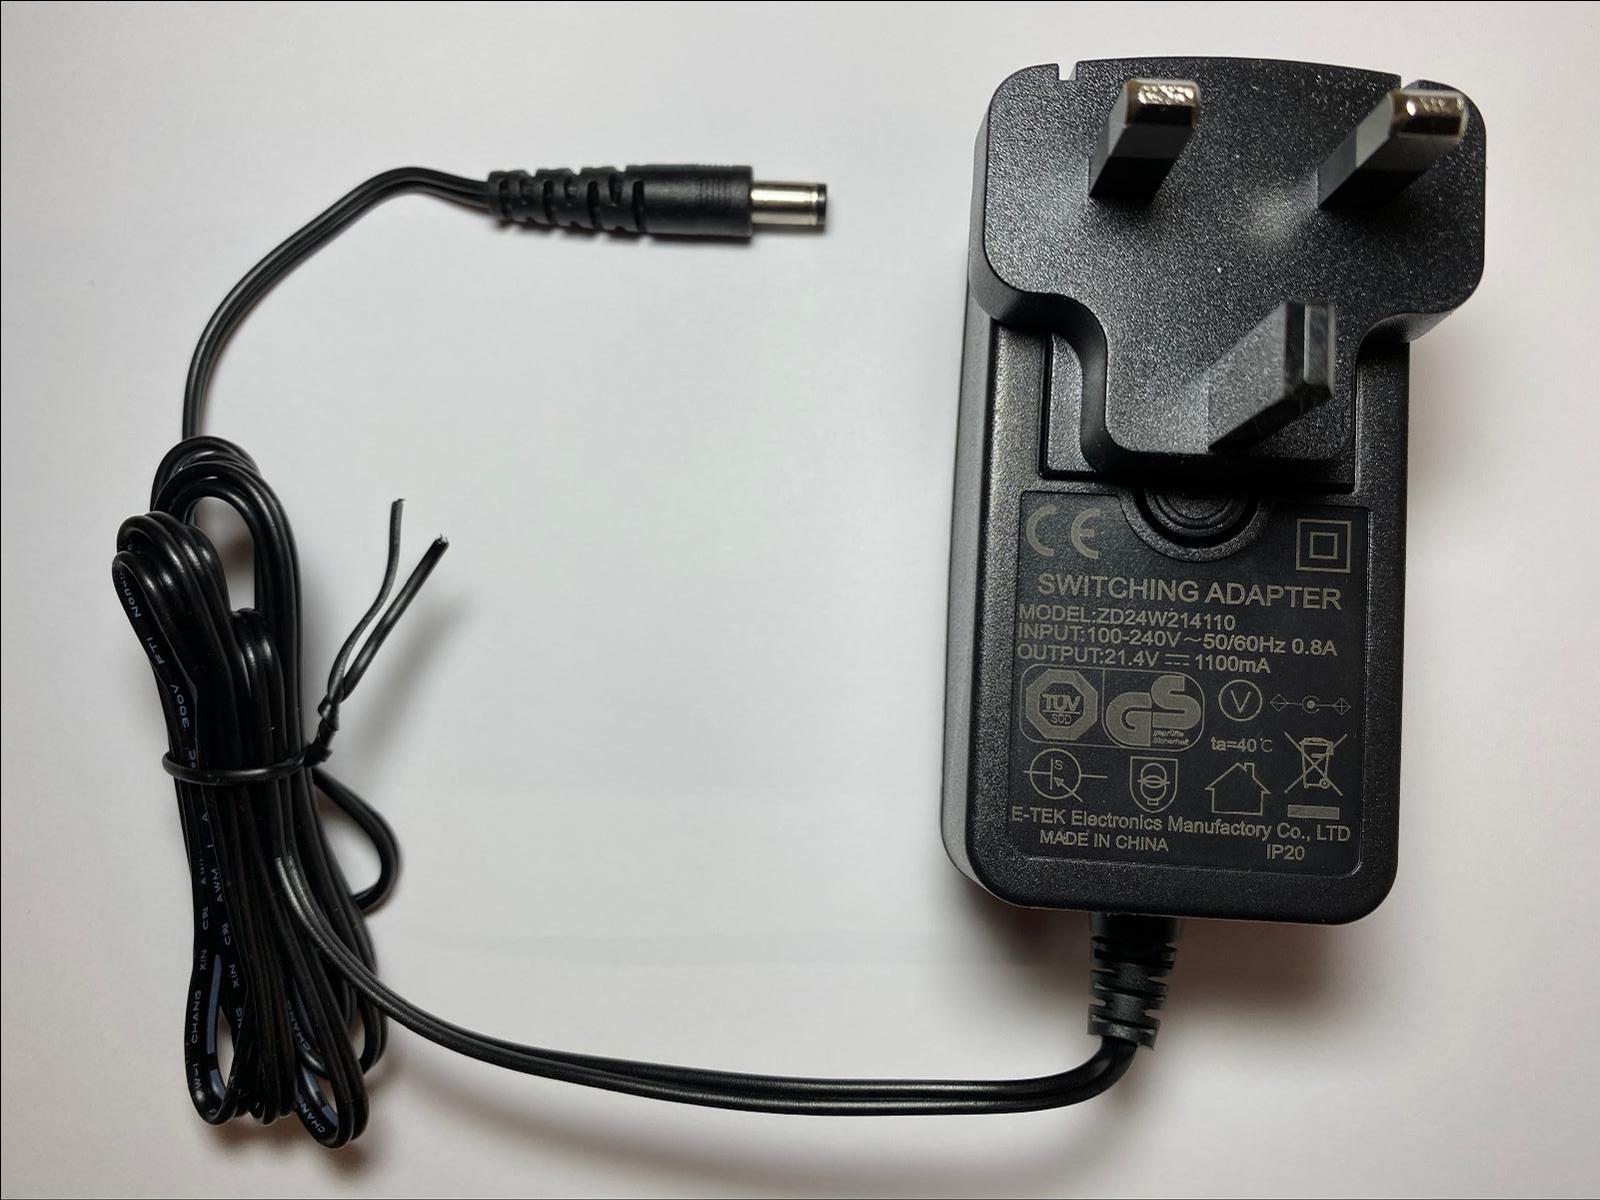 Replacement for K25V210100B 21V Charger for Hoover Velocity Evo Cordless Vacuum Max. Output Power: 23.54W Output Volt